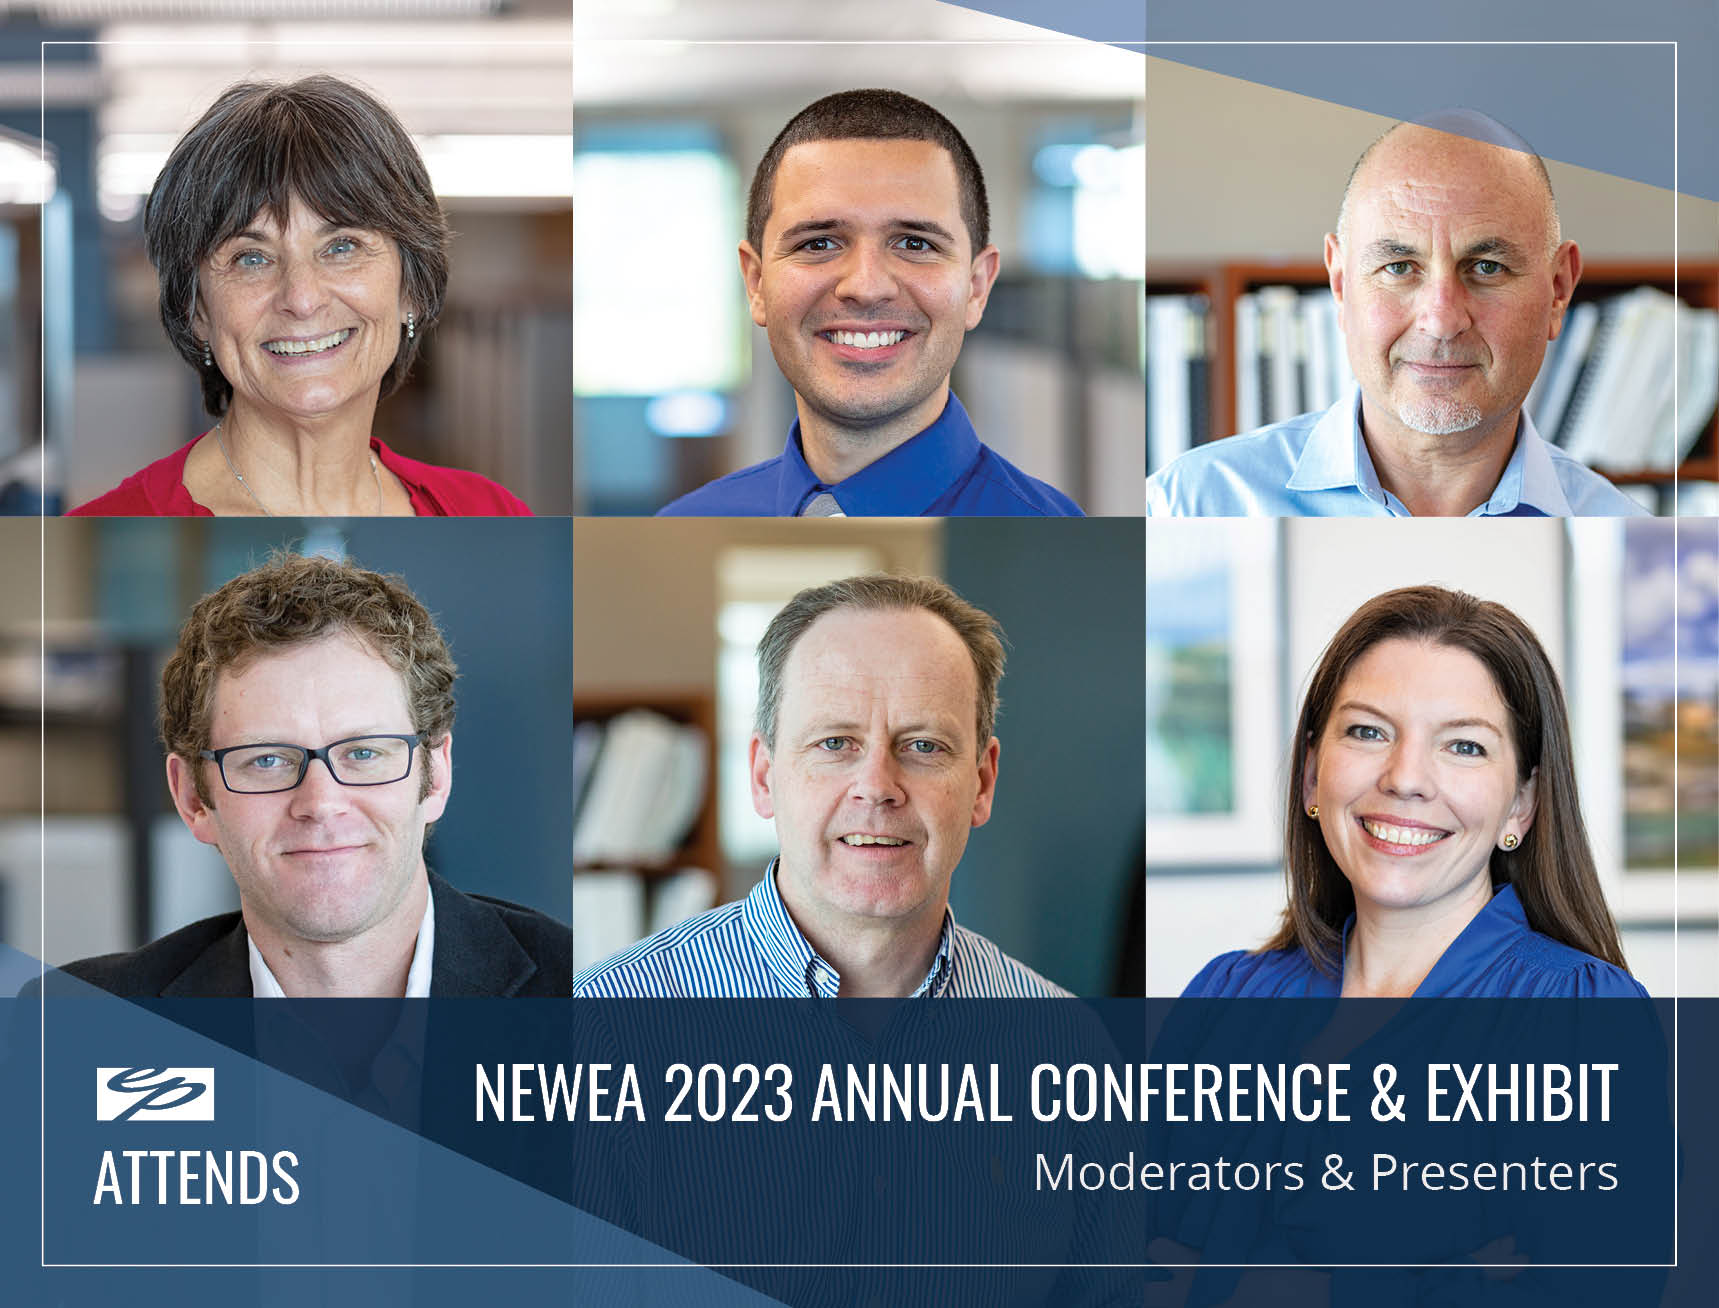 EP Attends NEWEA 2023 Annual Conference & Exhibit Environmental Partners